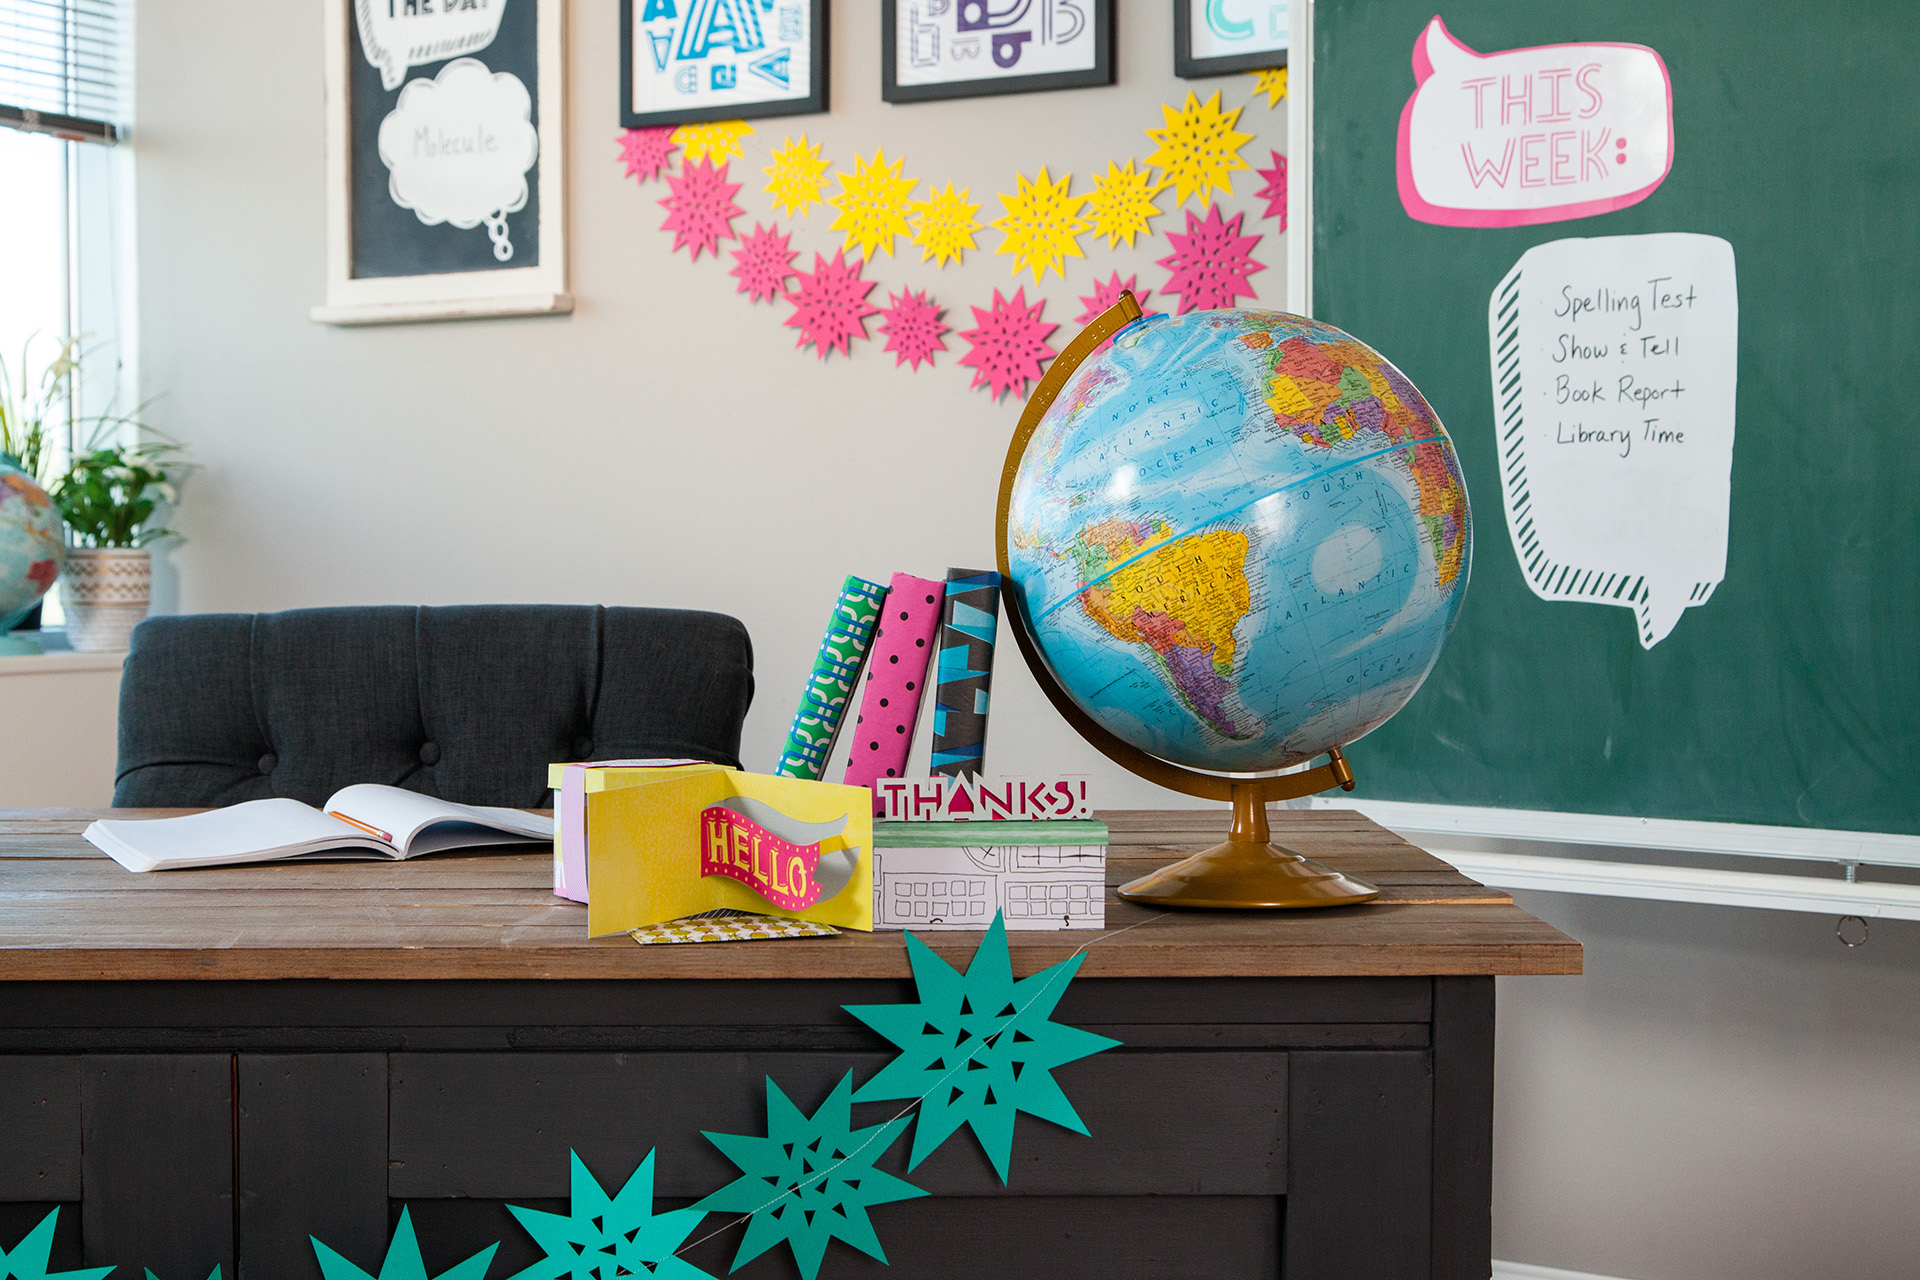 Show your teacher appreciation with these 4 gift ideas